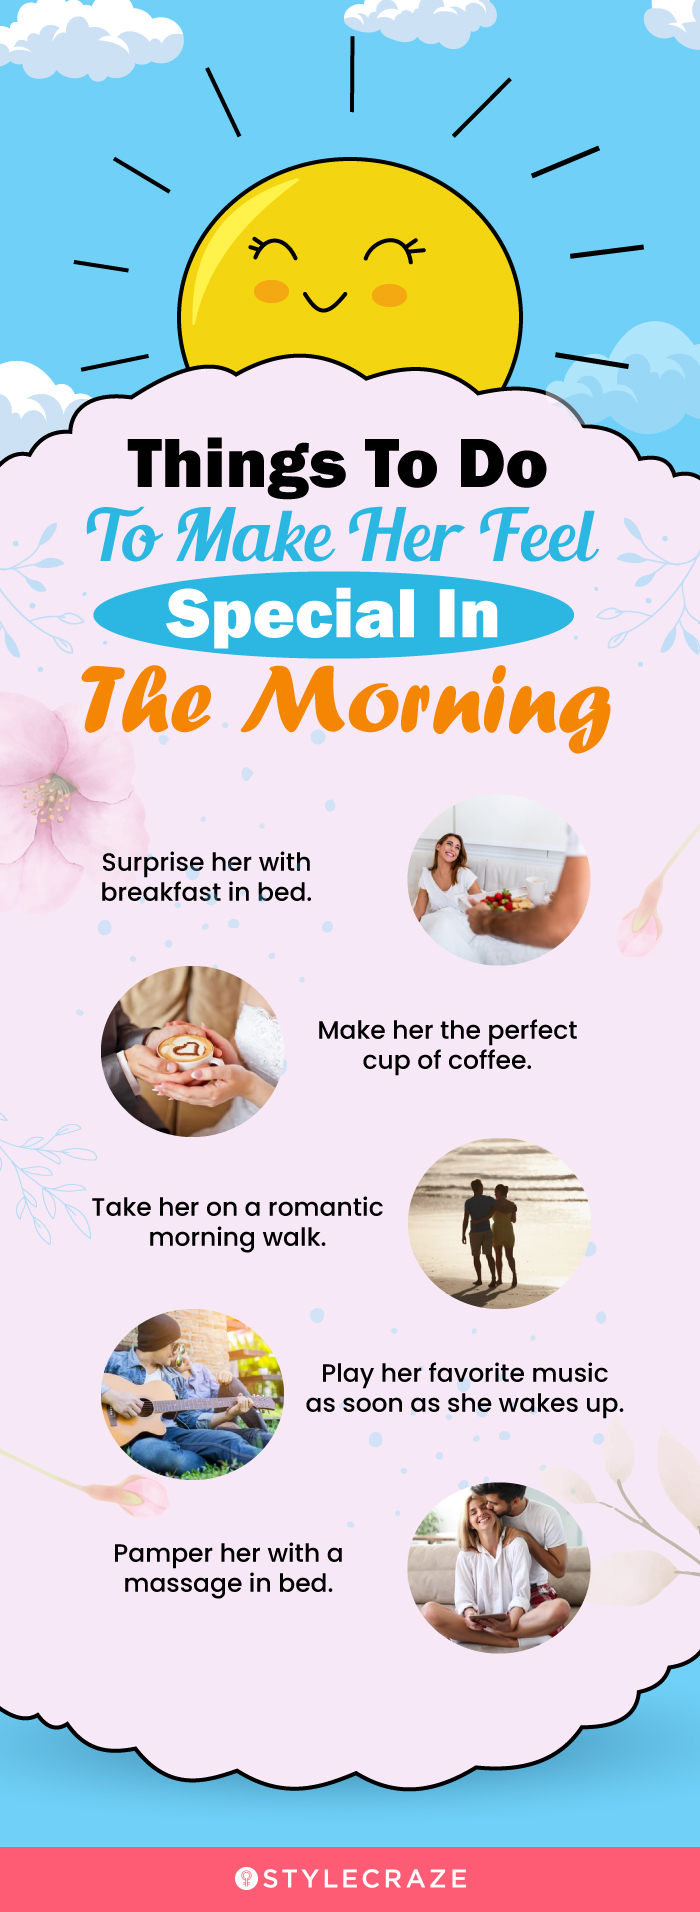 things to do to make her feel special in the morning (infographic)